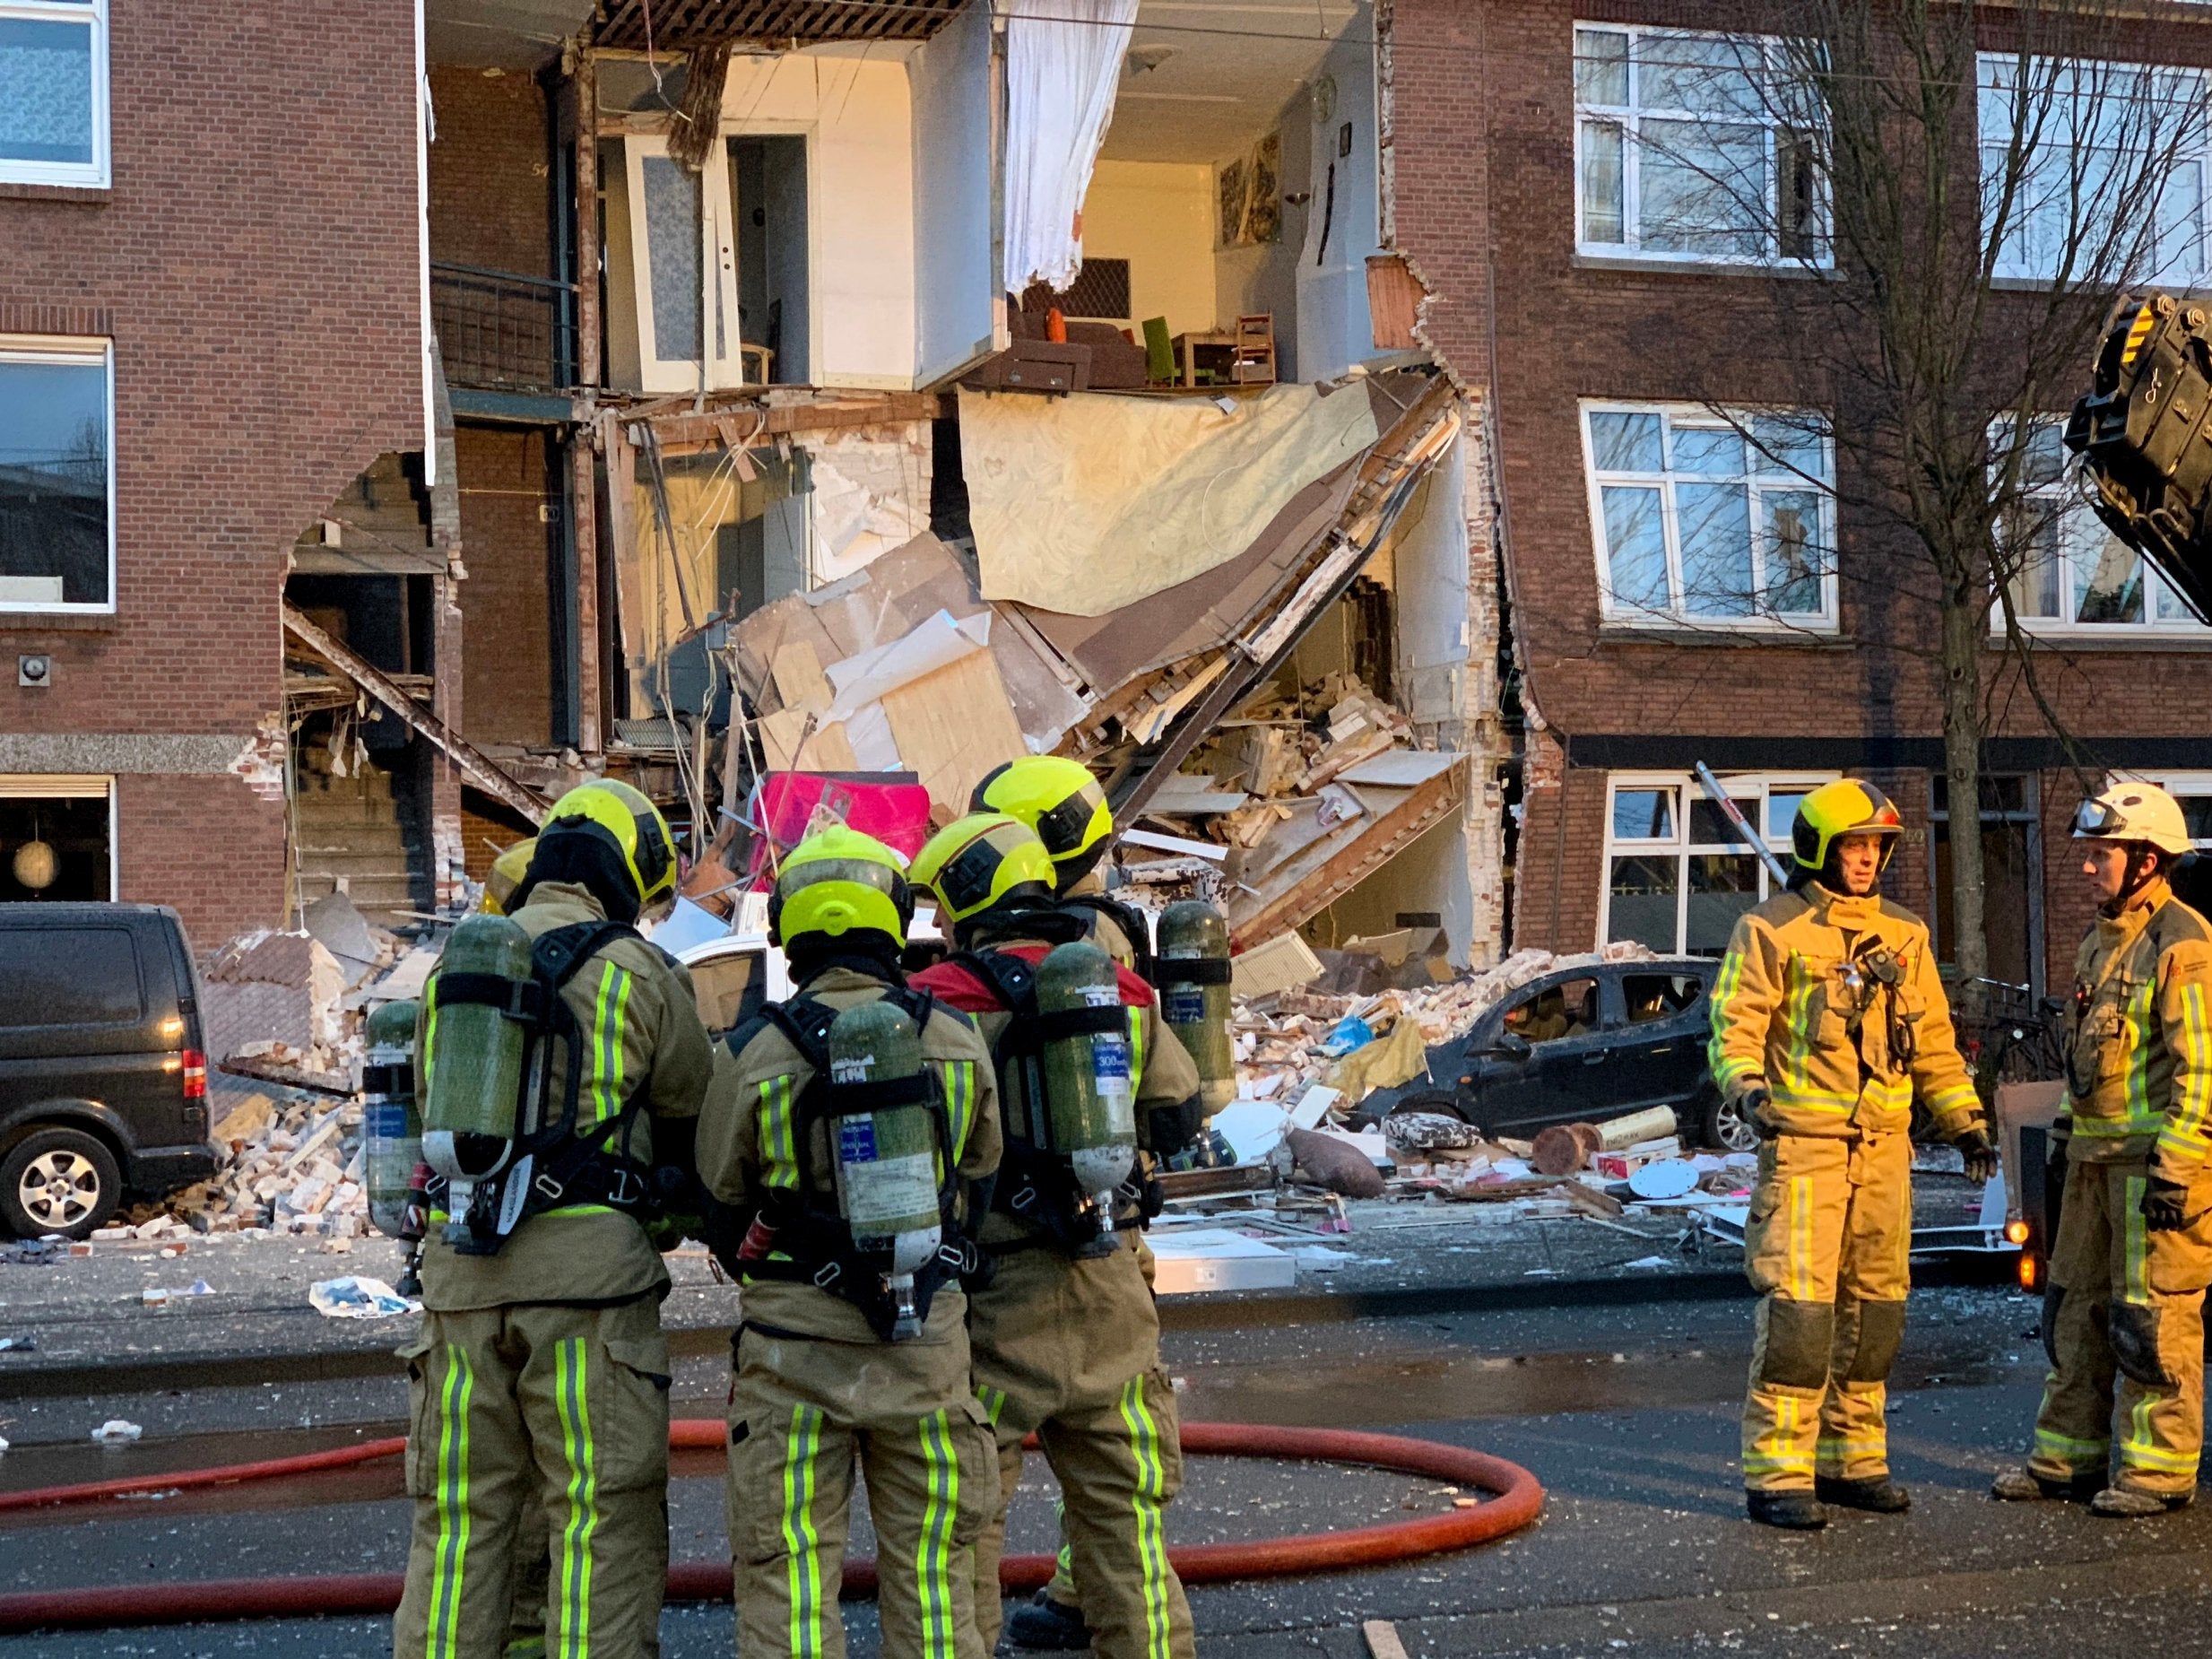 Emergency workers recovered two injured people from a collapsed three-story home